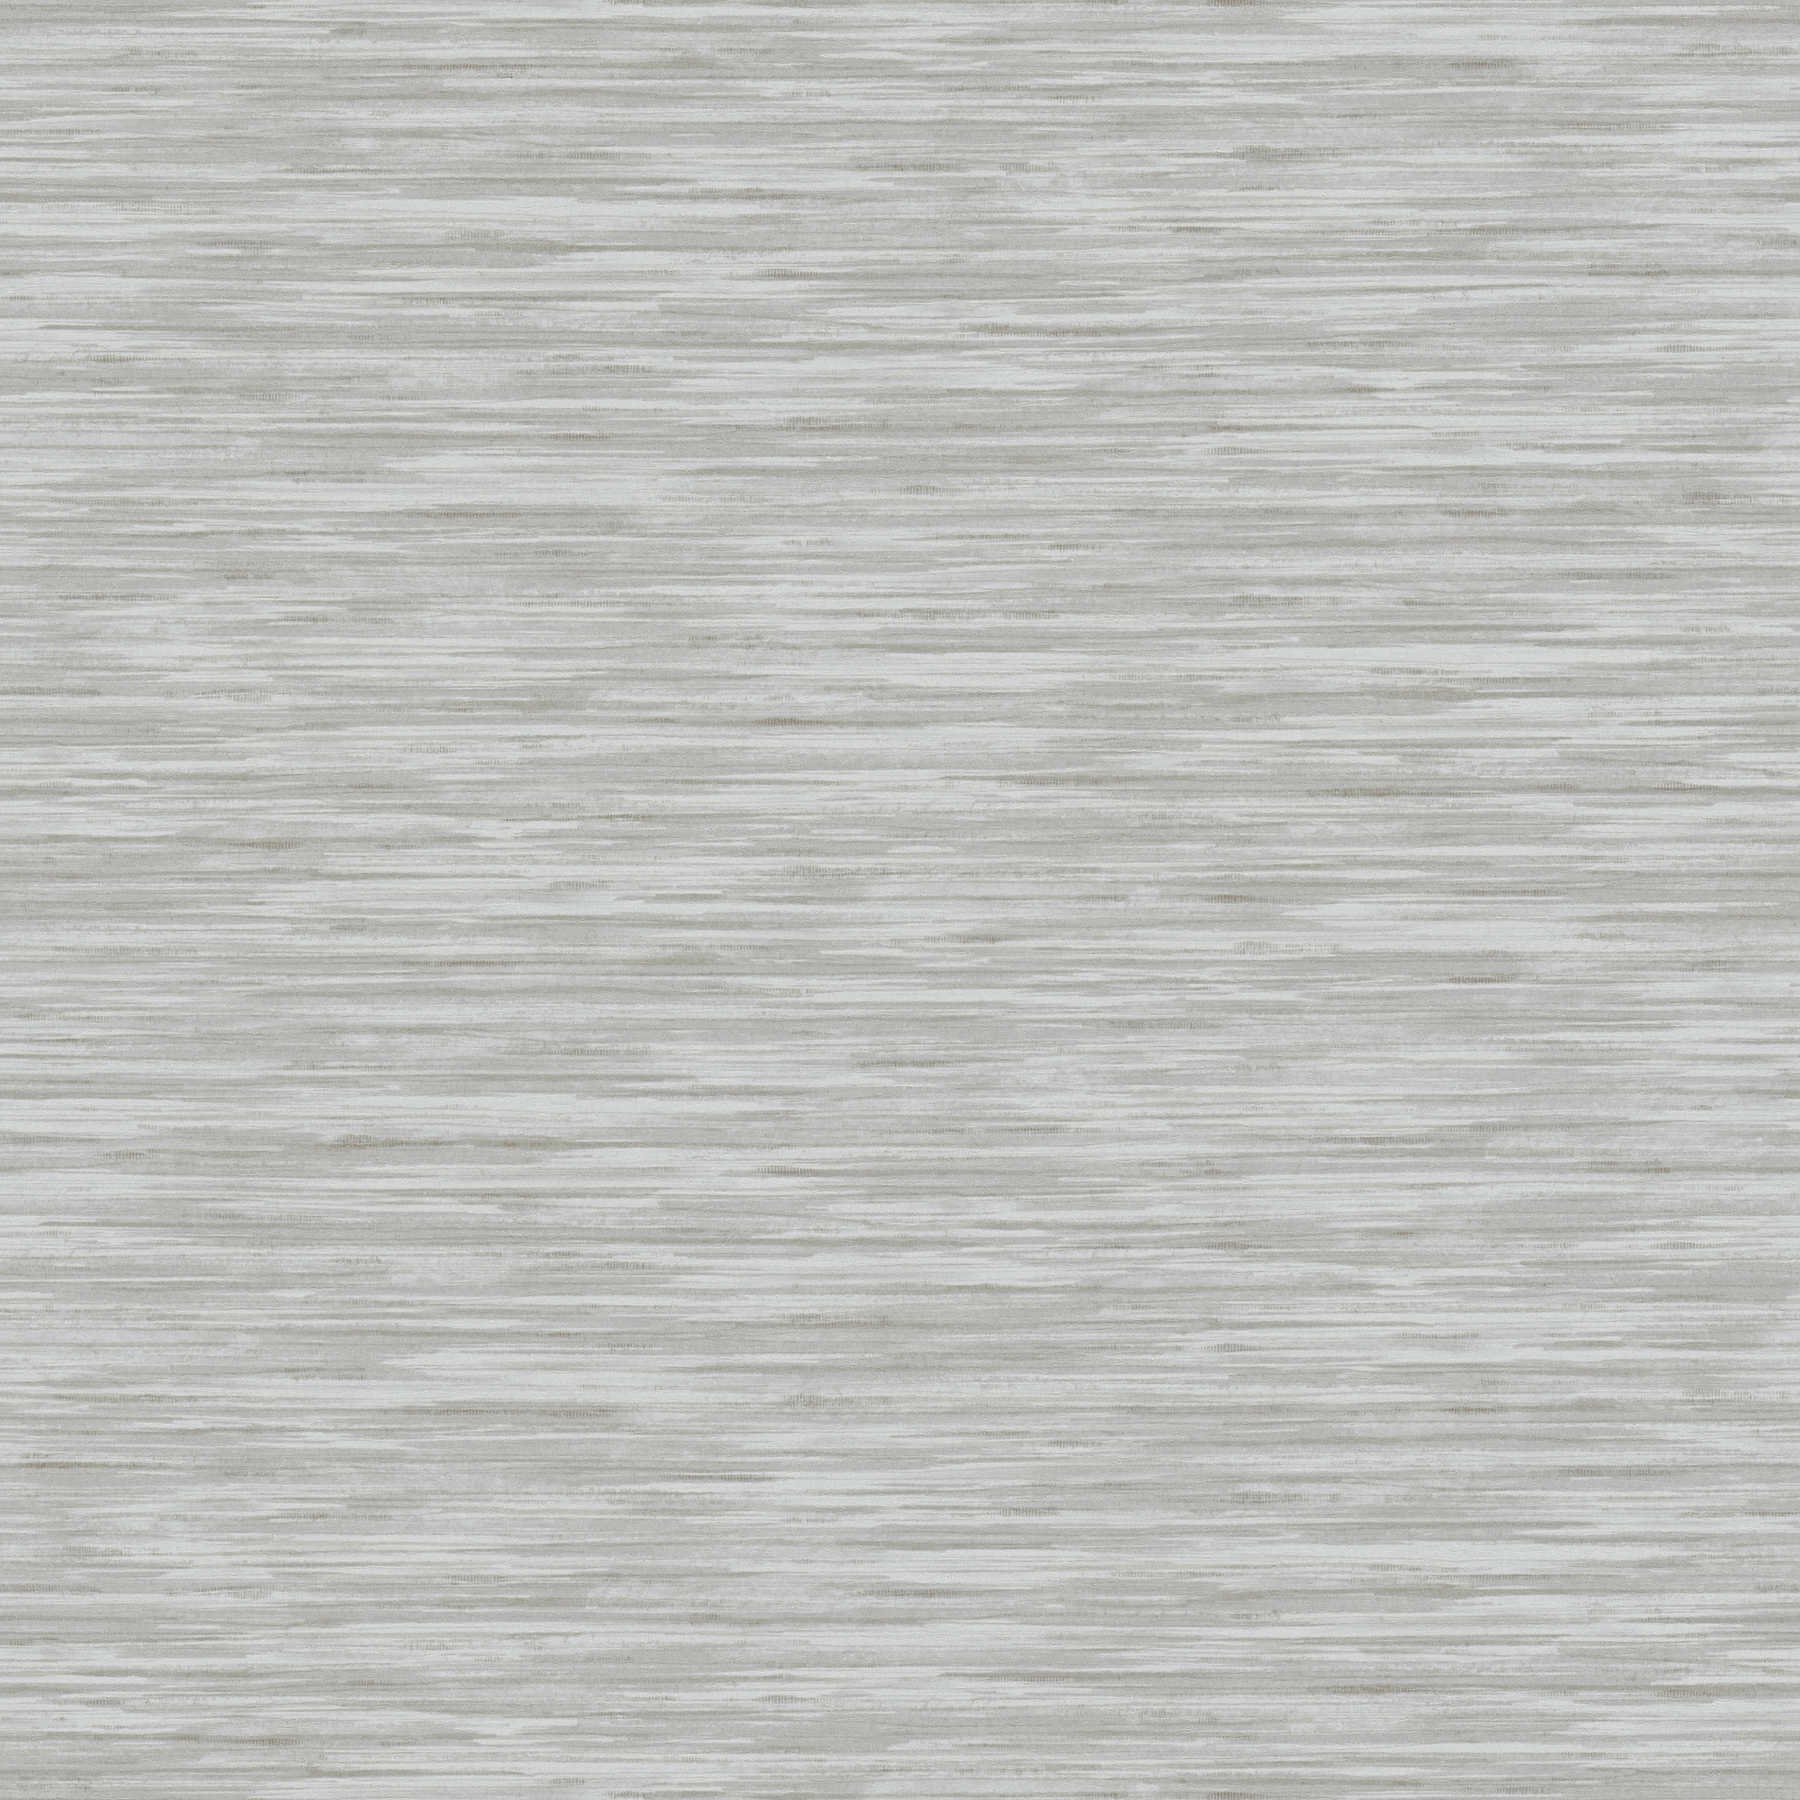 Non-woven wallpaper mottled with colour pattern - grey
